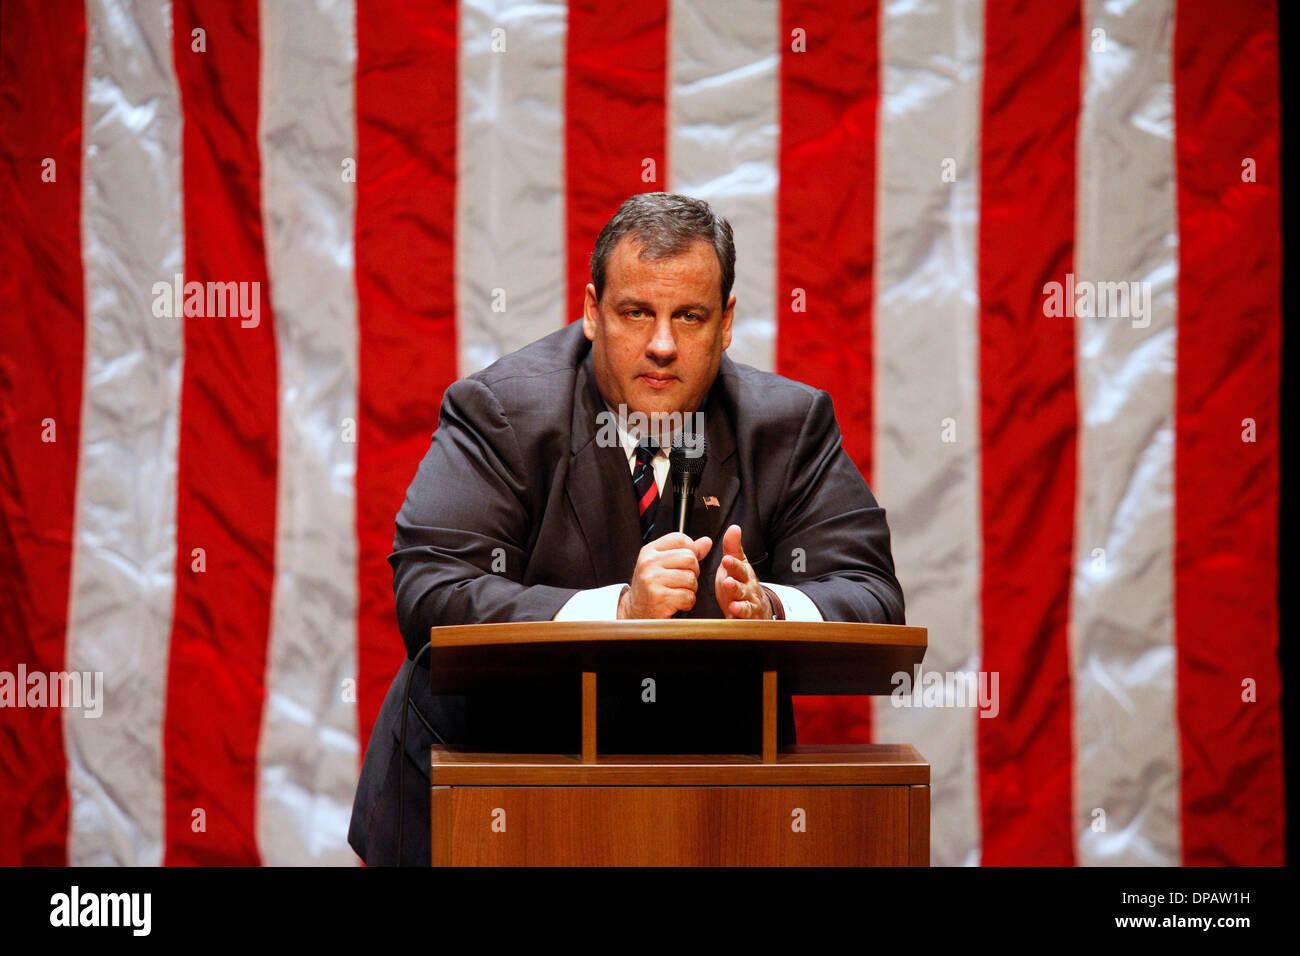 Jan. 8, 2014 - (File Photo) - New Jersey's Governor Chris Christie, the early front-runner for the 2016 Republican presidential nomination, is facing criticism after emails allegedly show that his aides conspired to create a traffic jam on the George Washington Bridge as a revenge plot against the town of a local mayor who was a political foe. PICTURED: Oct 13, 2009 - Fair Lawn, New Jersey, U.S. - US Attorney CHRIS CHRISTIE during a 'Conversation with Chris Christie' event at the Fair Lawn Community Center in New Jersey during his campaign trail as the Republican candidate for New Jersey Gover Stock Photo